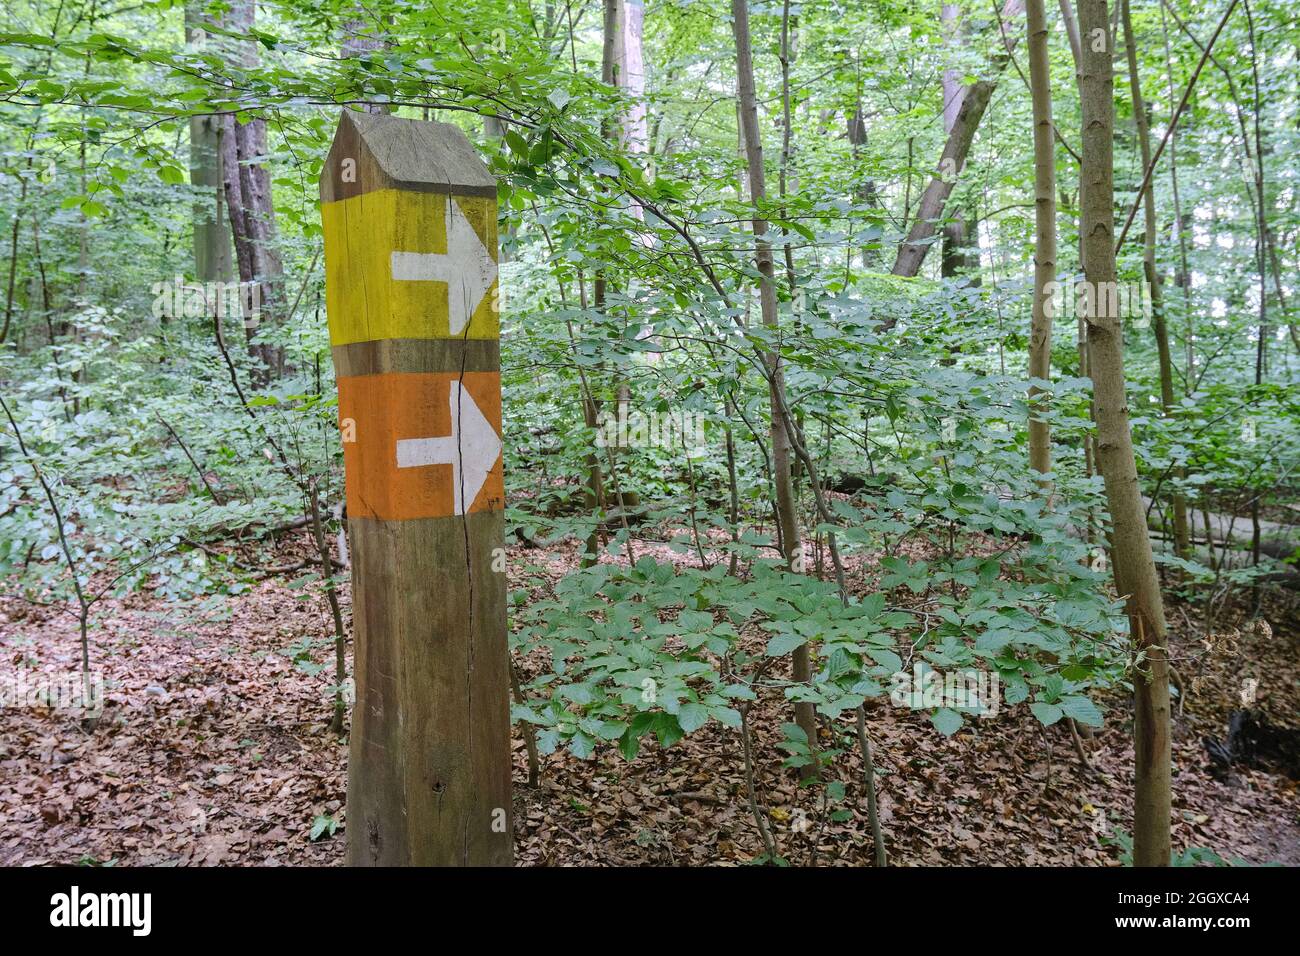 Wooden sign pole with arrows in tge forest Stock Photo